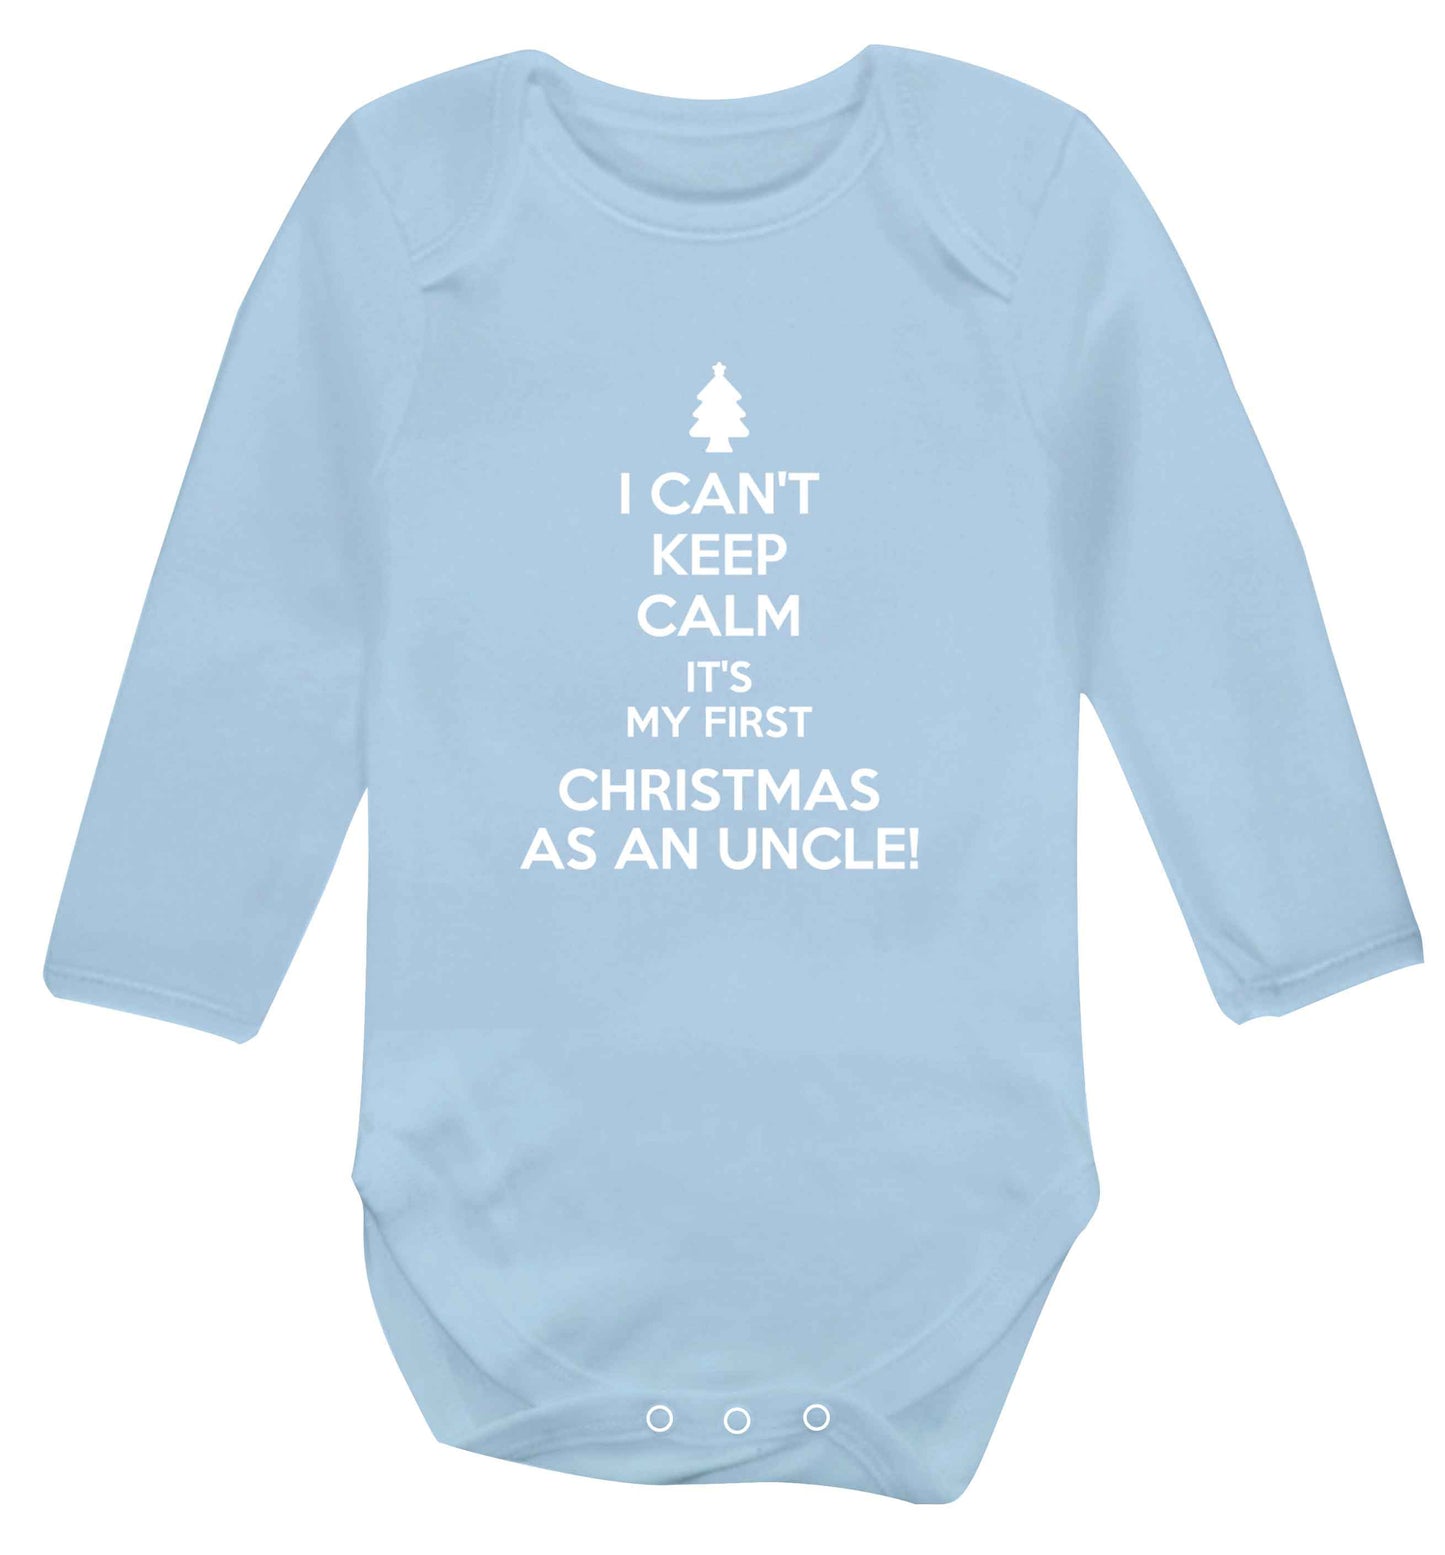 I can't keep calm it's my first Christmas as an uncle! Baby Vest long sleeved pale blue 6-12 months